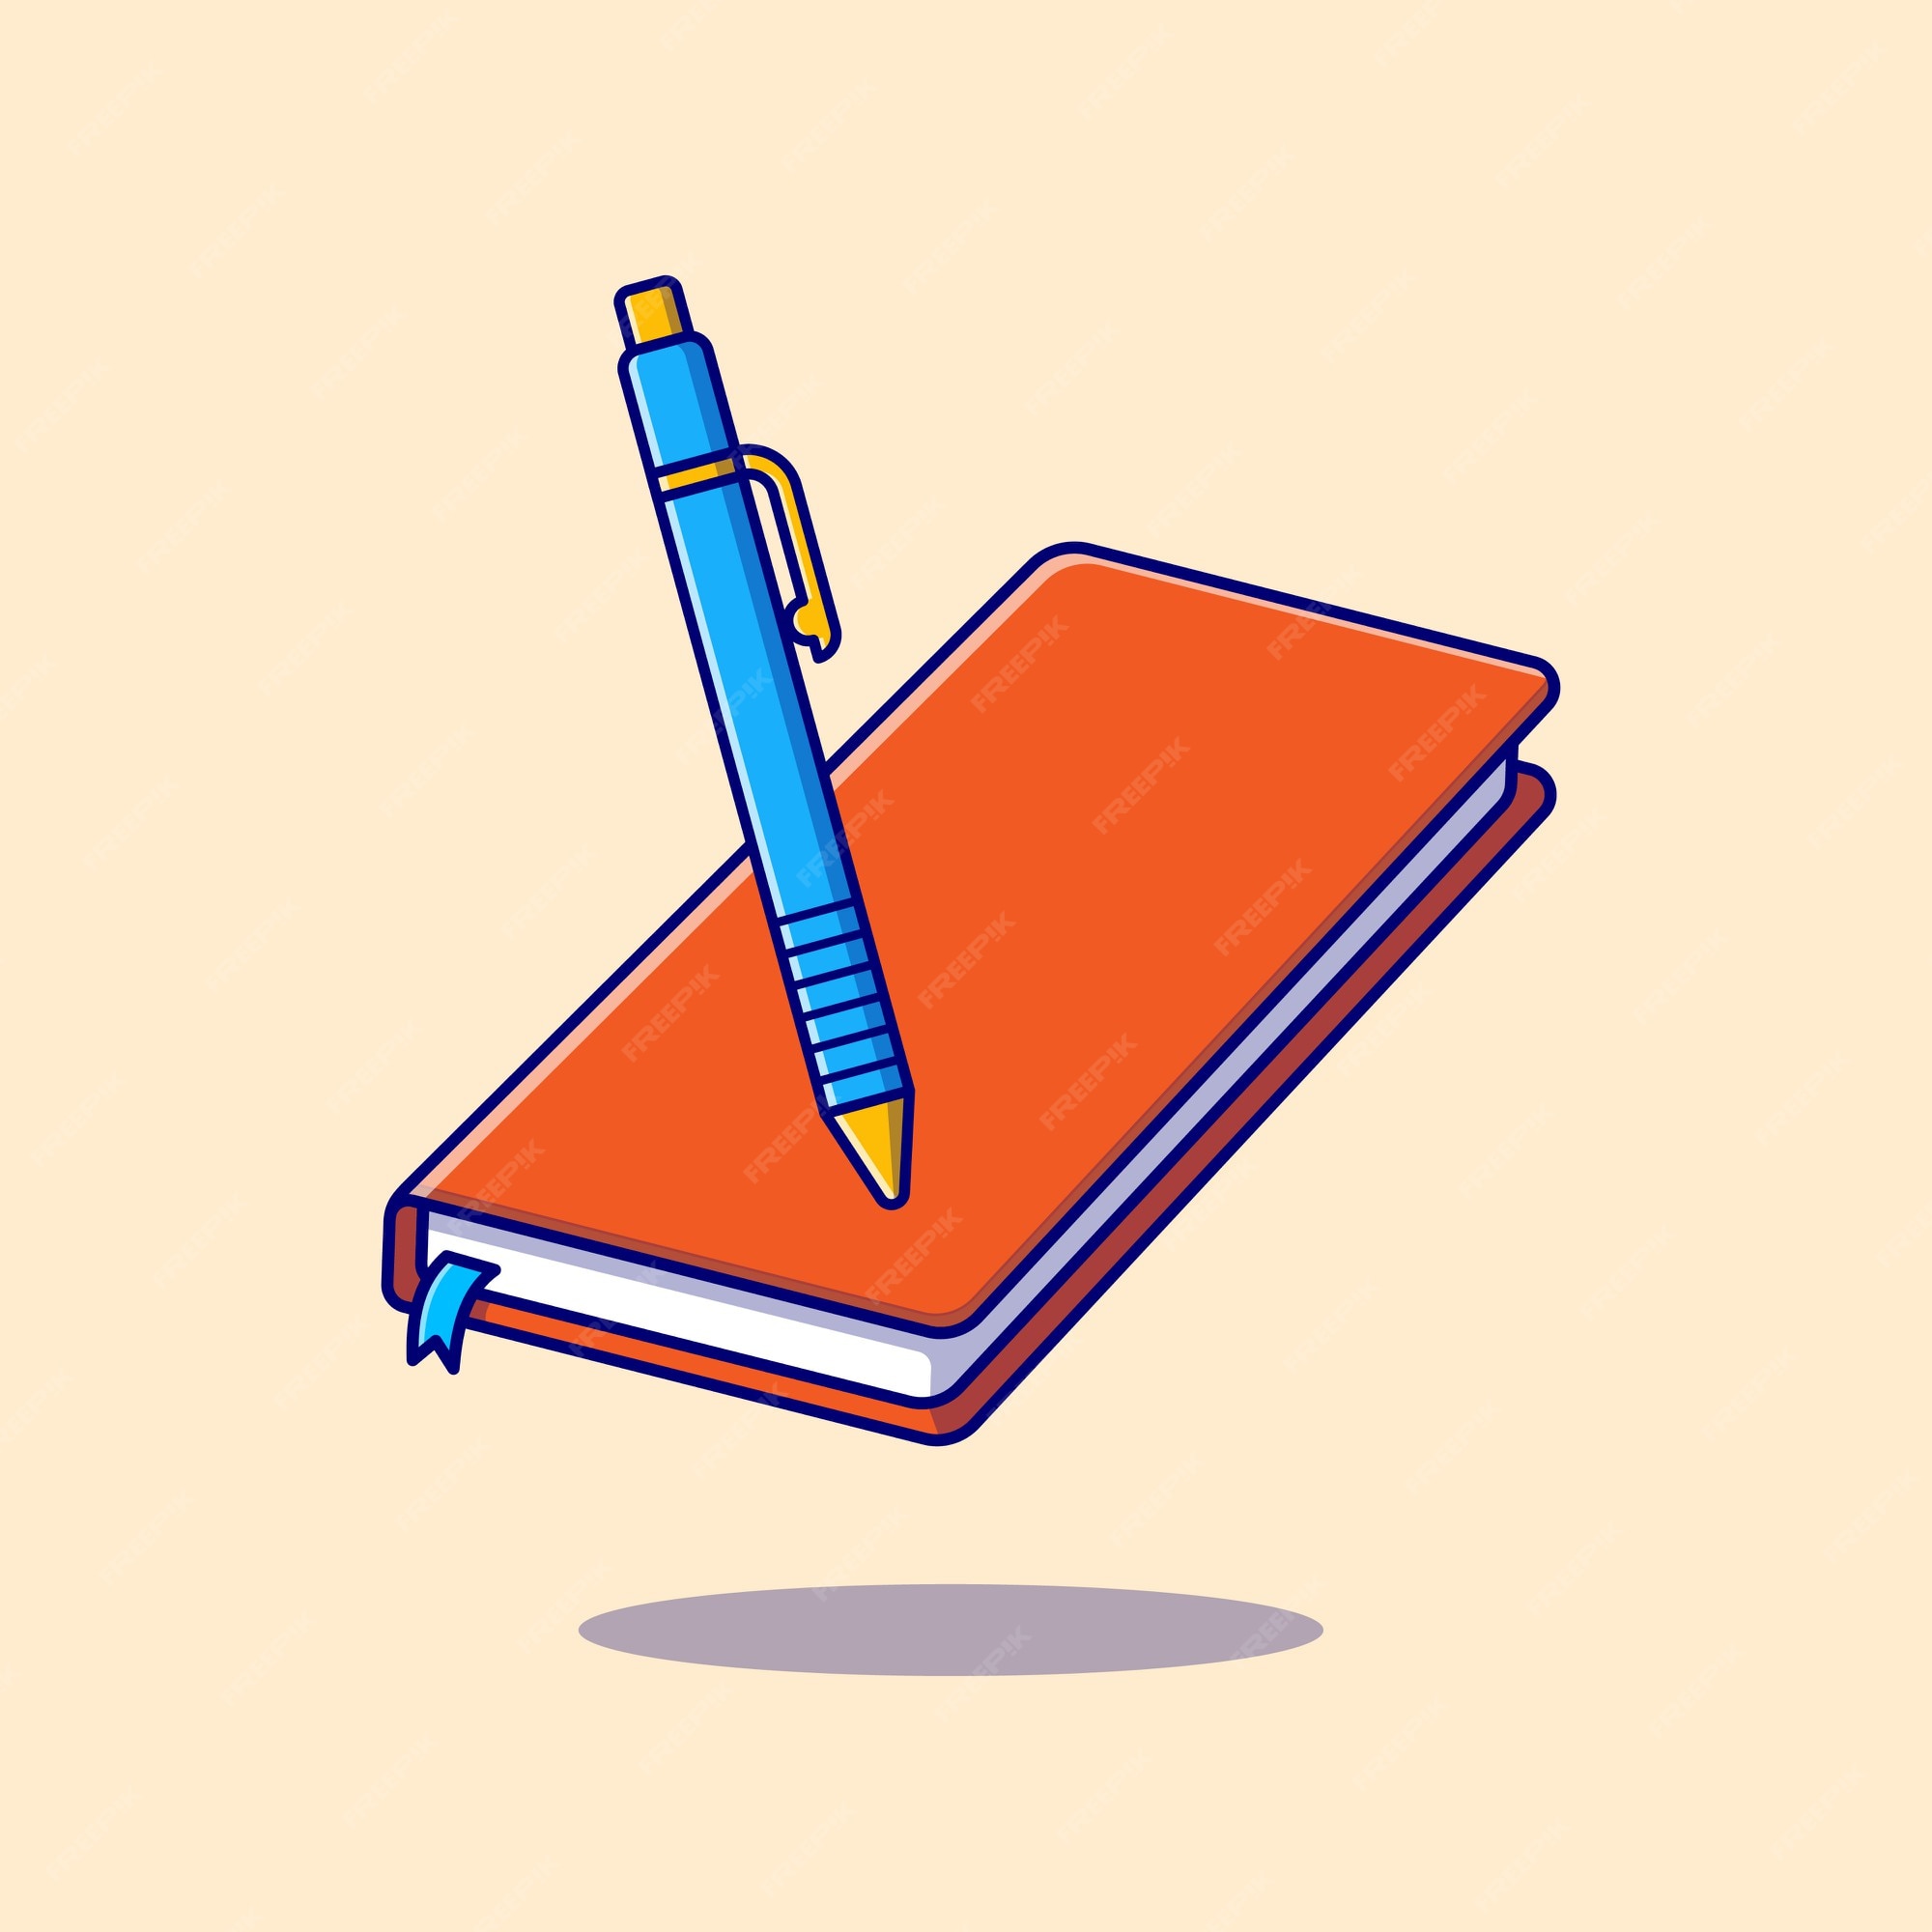 Free Vector  Book and pen cartoon icon illustration. education object icon  concept isolated . flat cartoon style